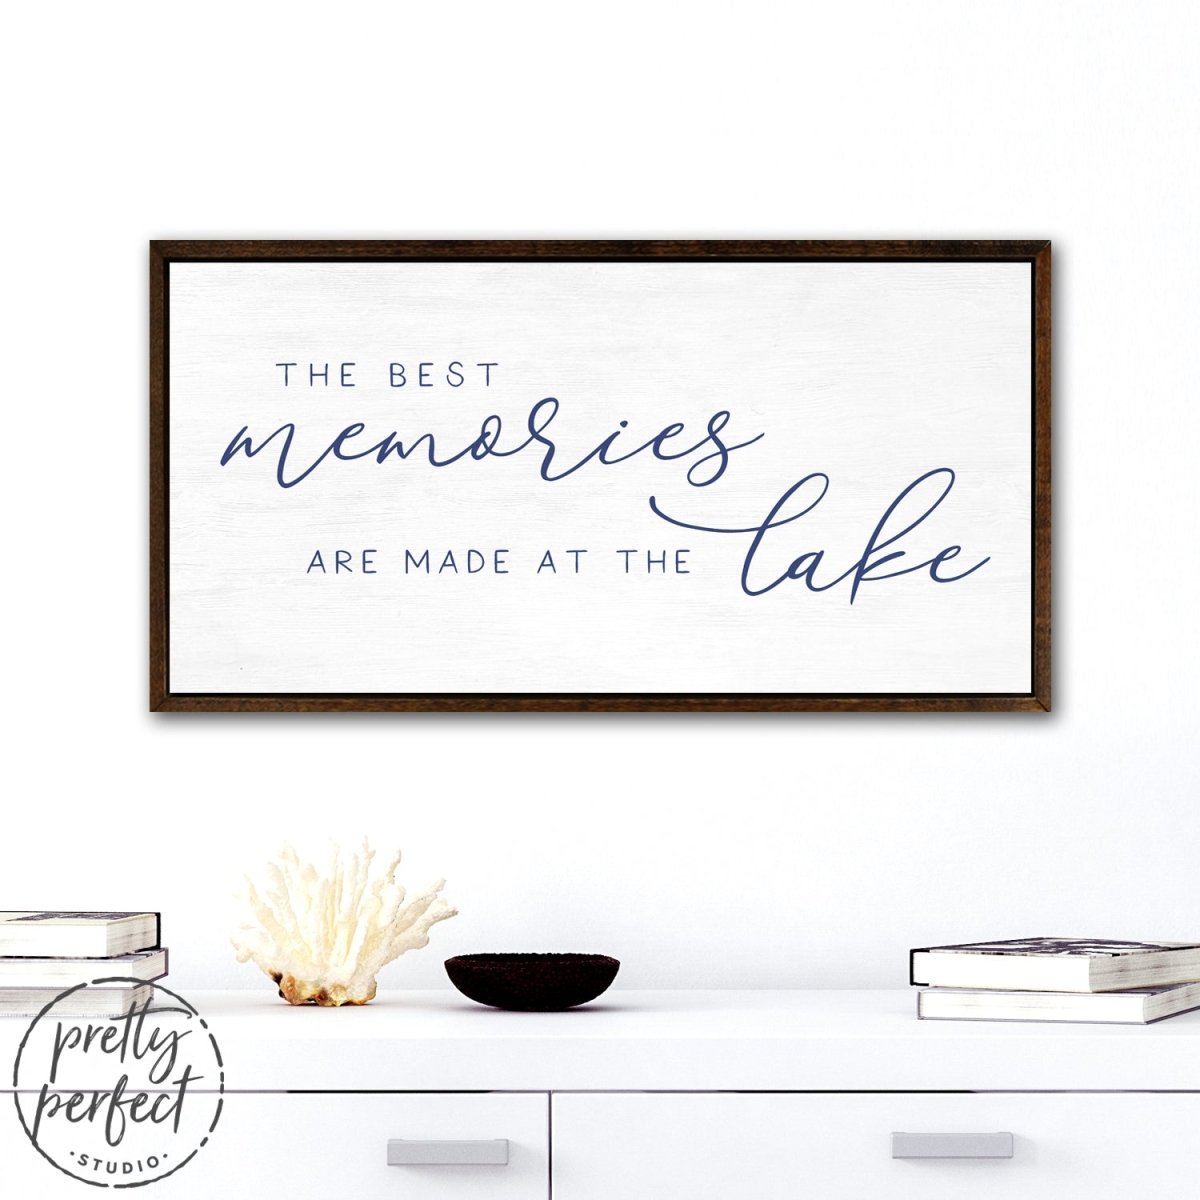 The Best Memories Are Made At The Lake Wall Art Hanging on Wall Above Table - Pretty Perfect Studio